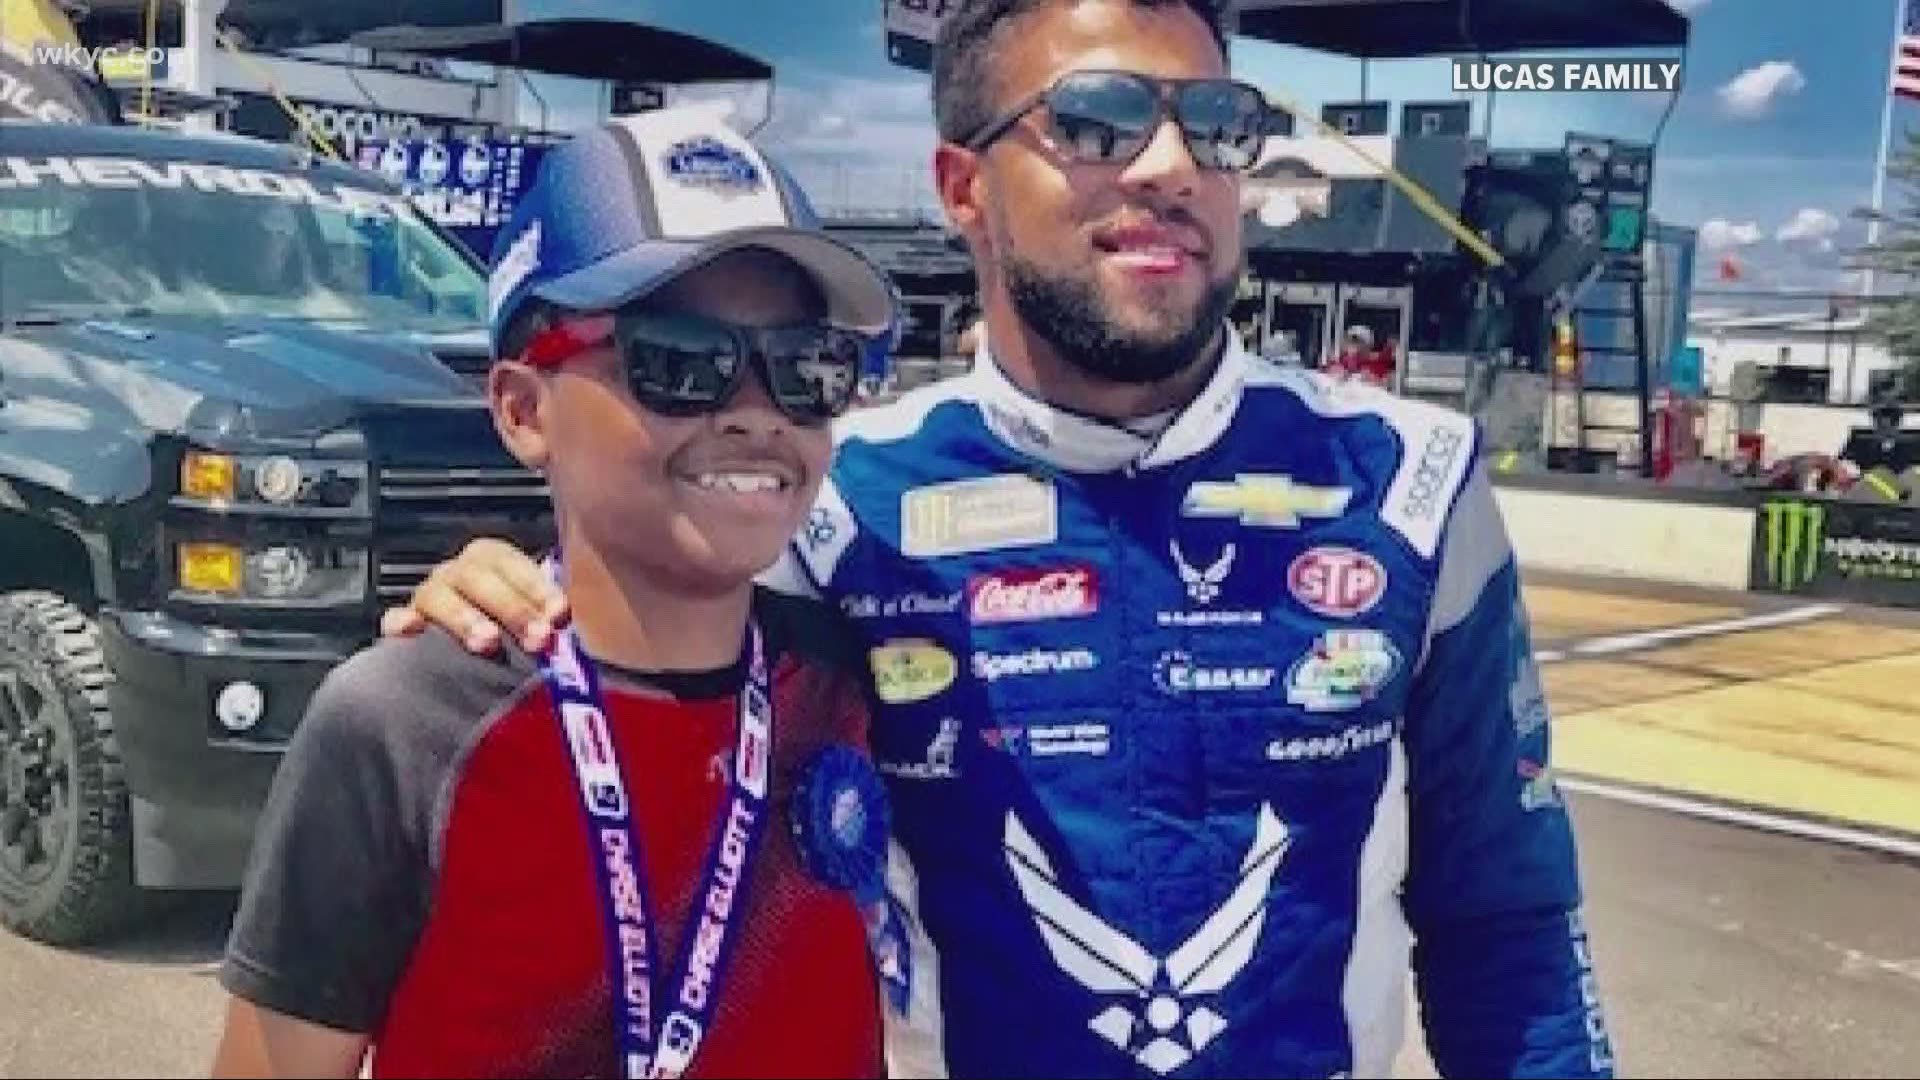 The Cup Series' only African American driver, Bubba Wallace, took a stand.  A local family also supported Wallace, pushing for change via social media.